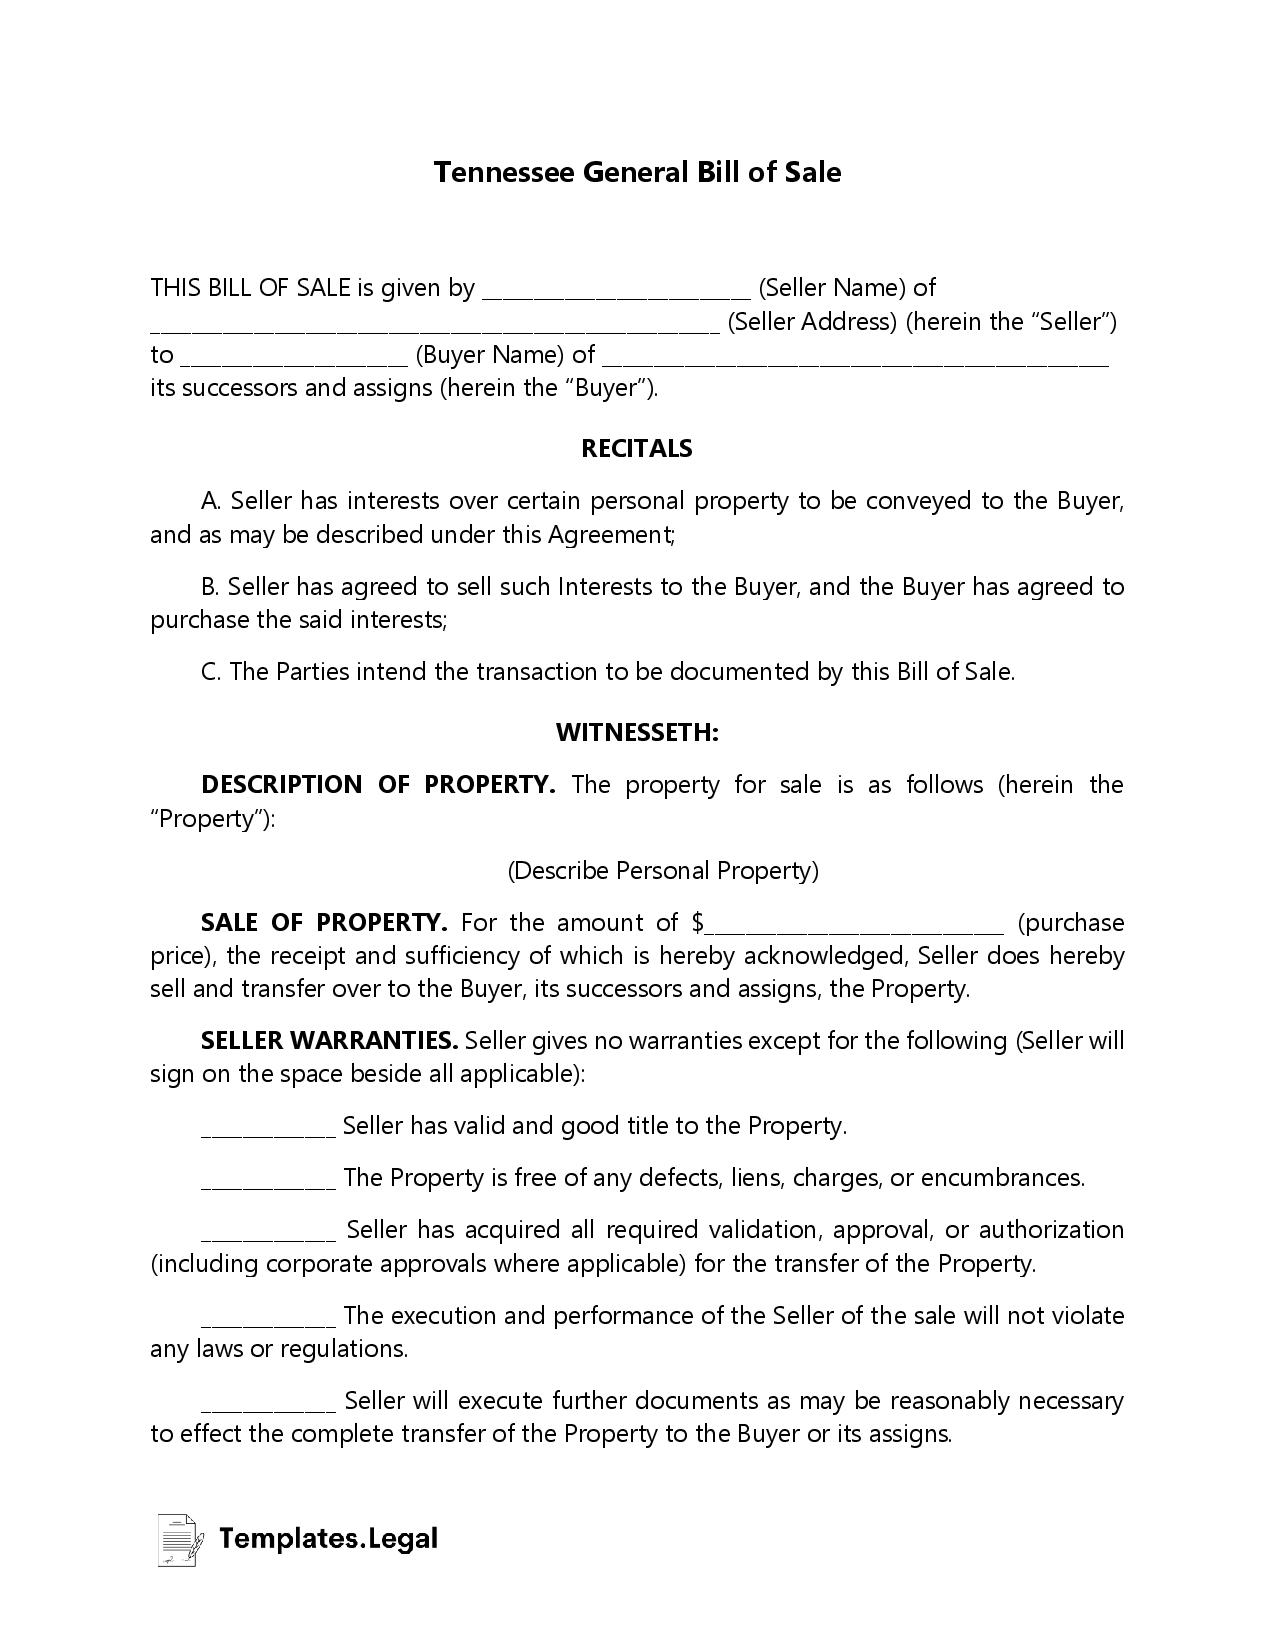 Tennessee General Bill of Sale - Templates.Legal